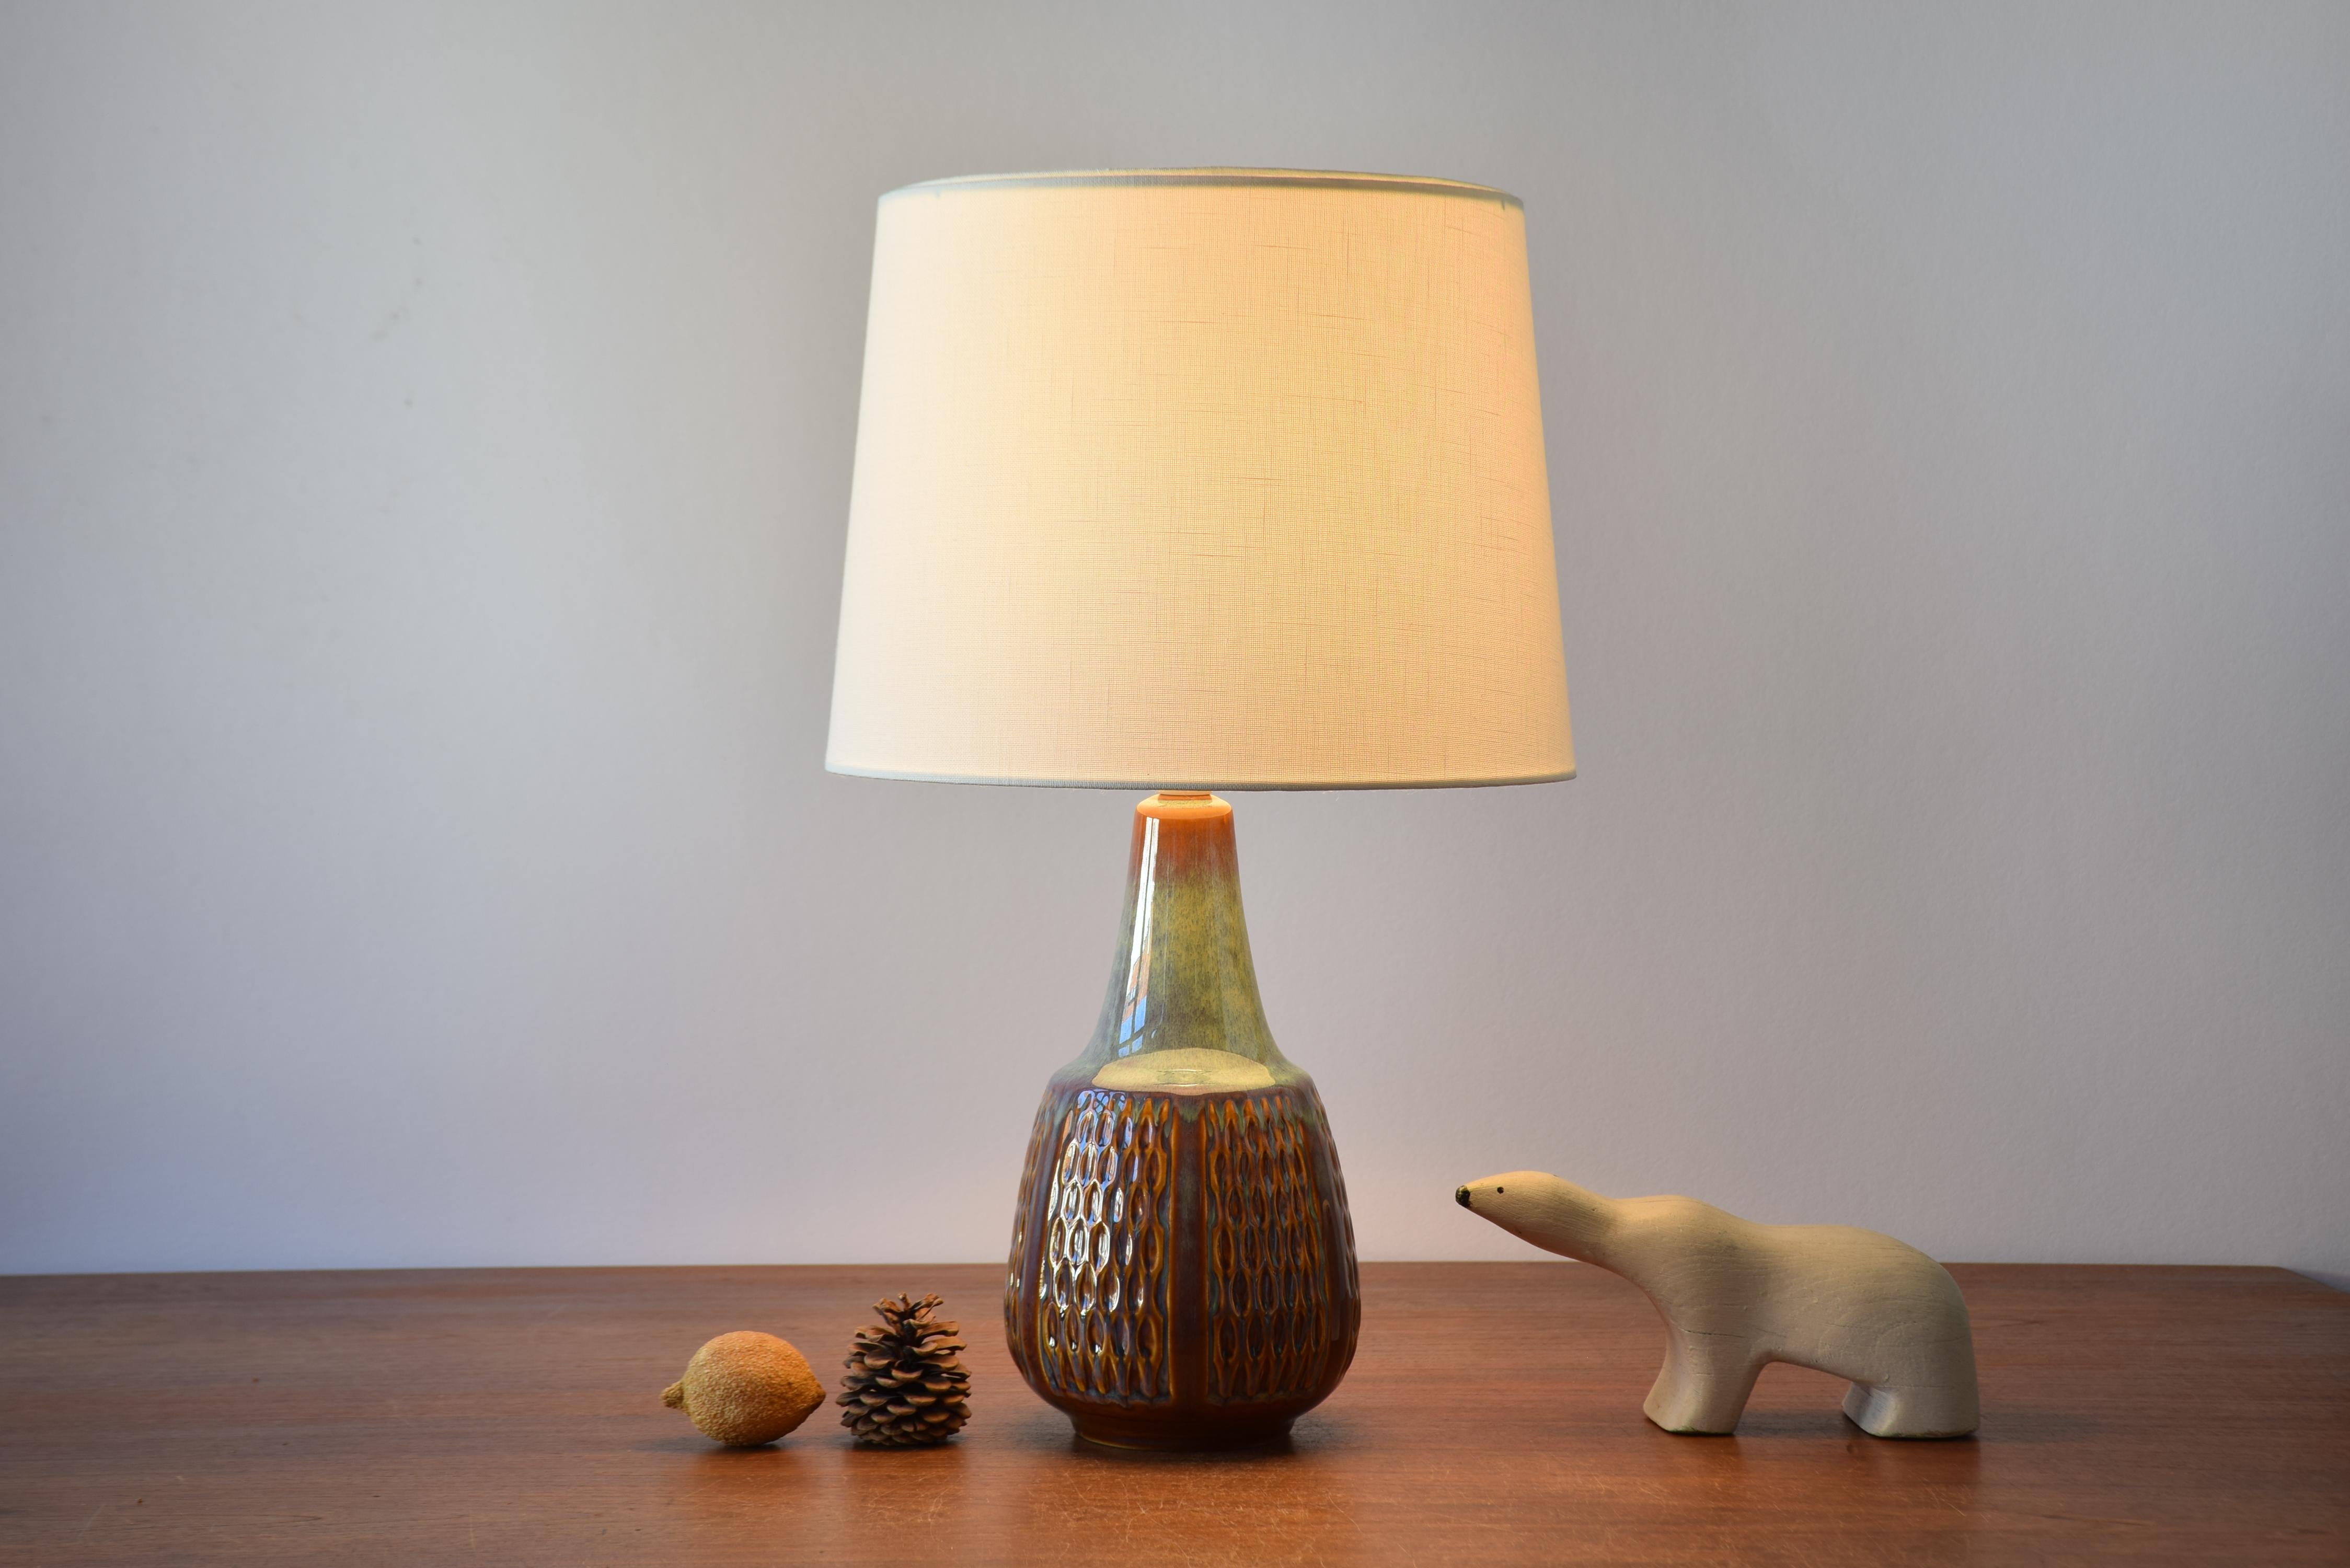 Rare mid-century Danish table lamp from the acknowledged stoneware manufacturer Søholm. Made circa 1960s.

Tall ceramic table lamp designed by Einar Johansen for Søholm, Denmark. Made ca. 1960s.

The glaze of the lamp remind of the Nordic light